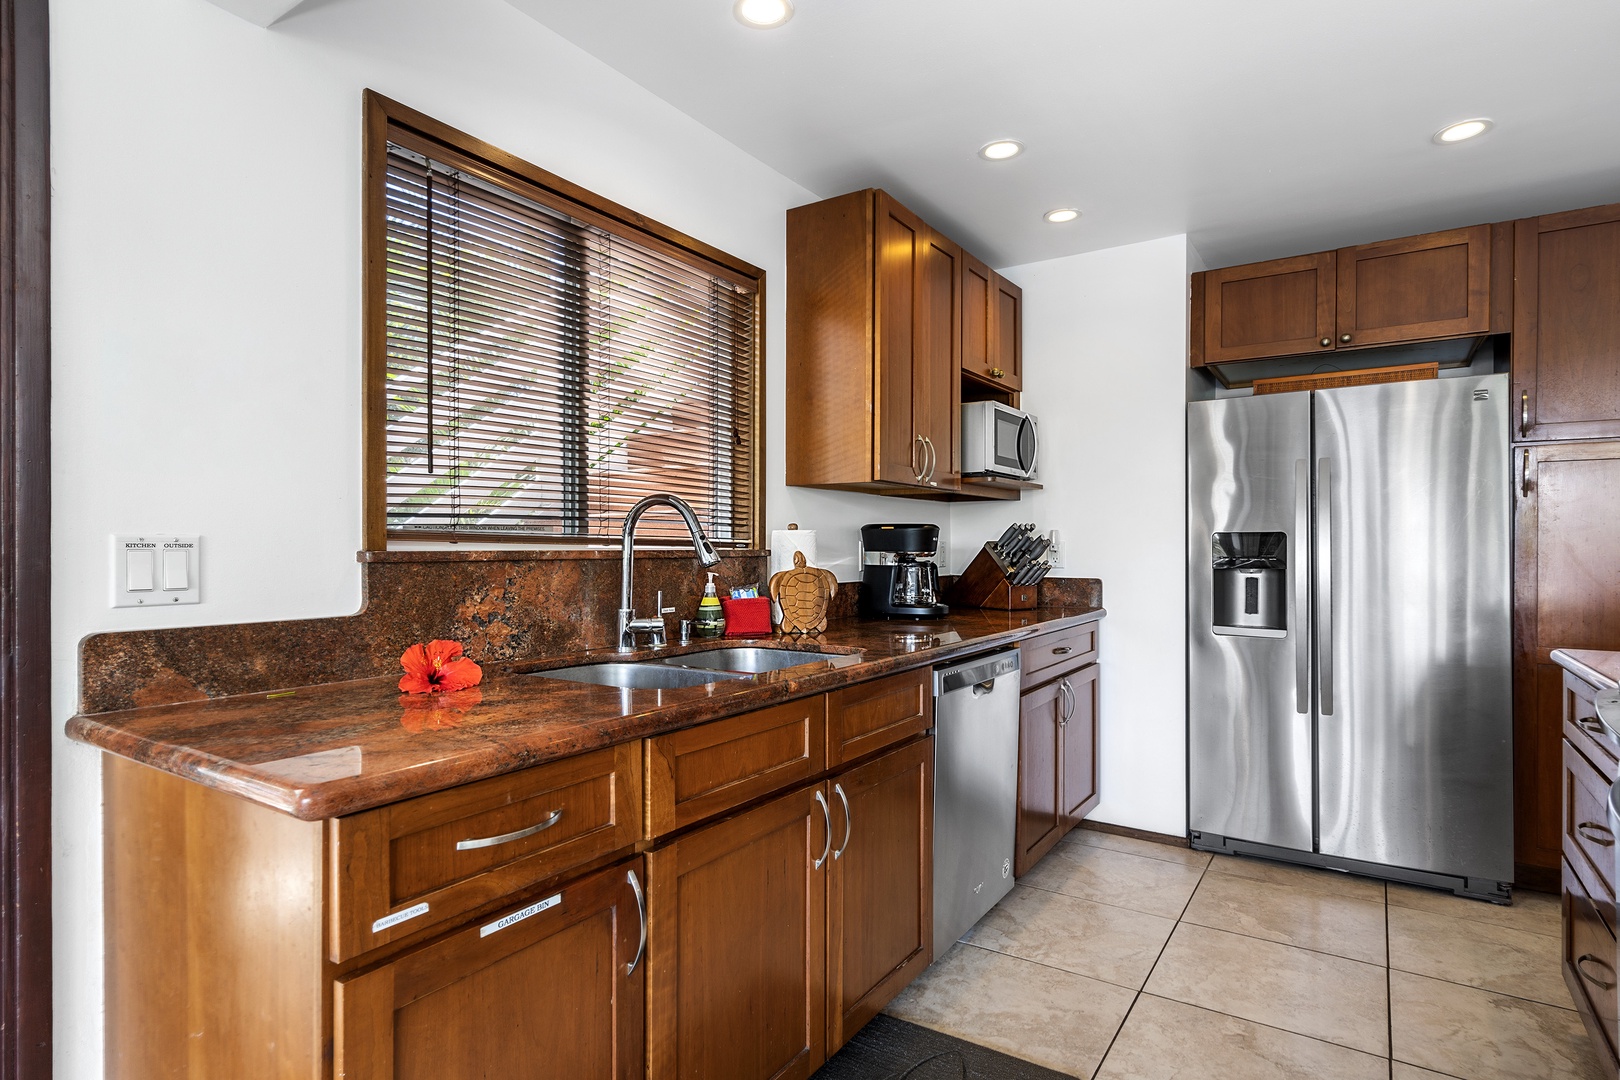 Kailua Kona Vacation Rentals, Kona's Shangri La - Second floor fully equipped kitchen with stainless appliances